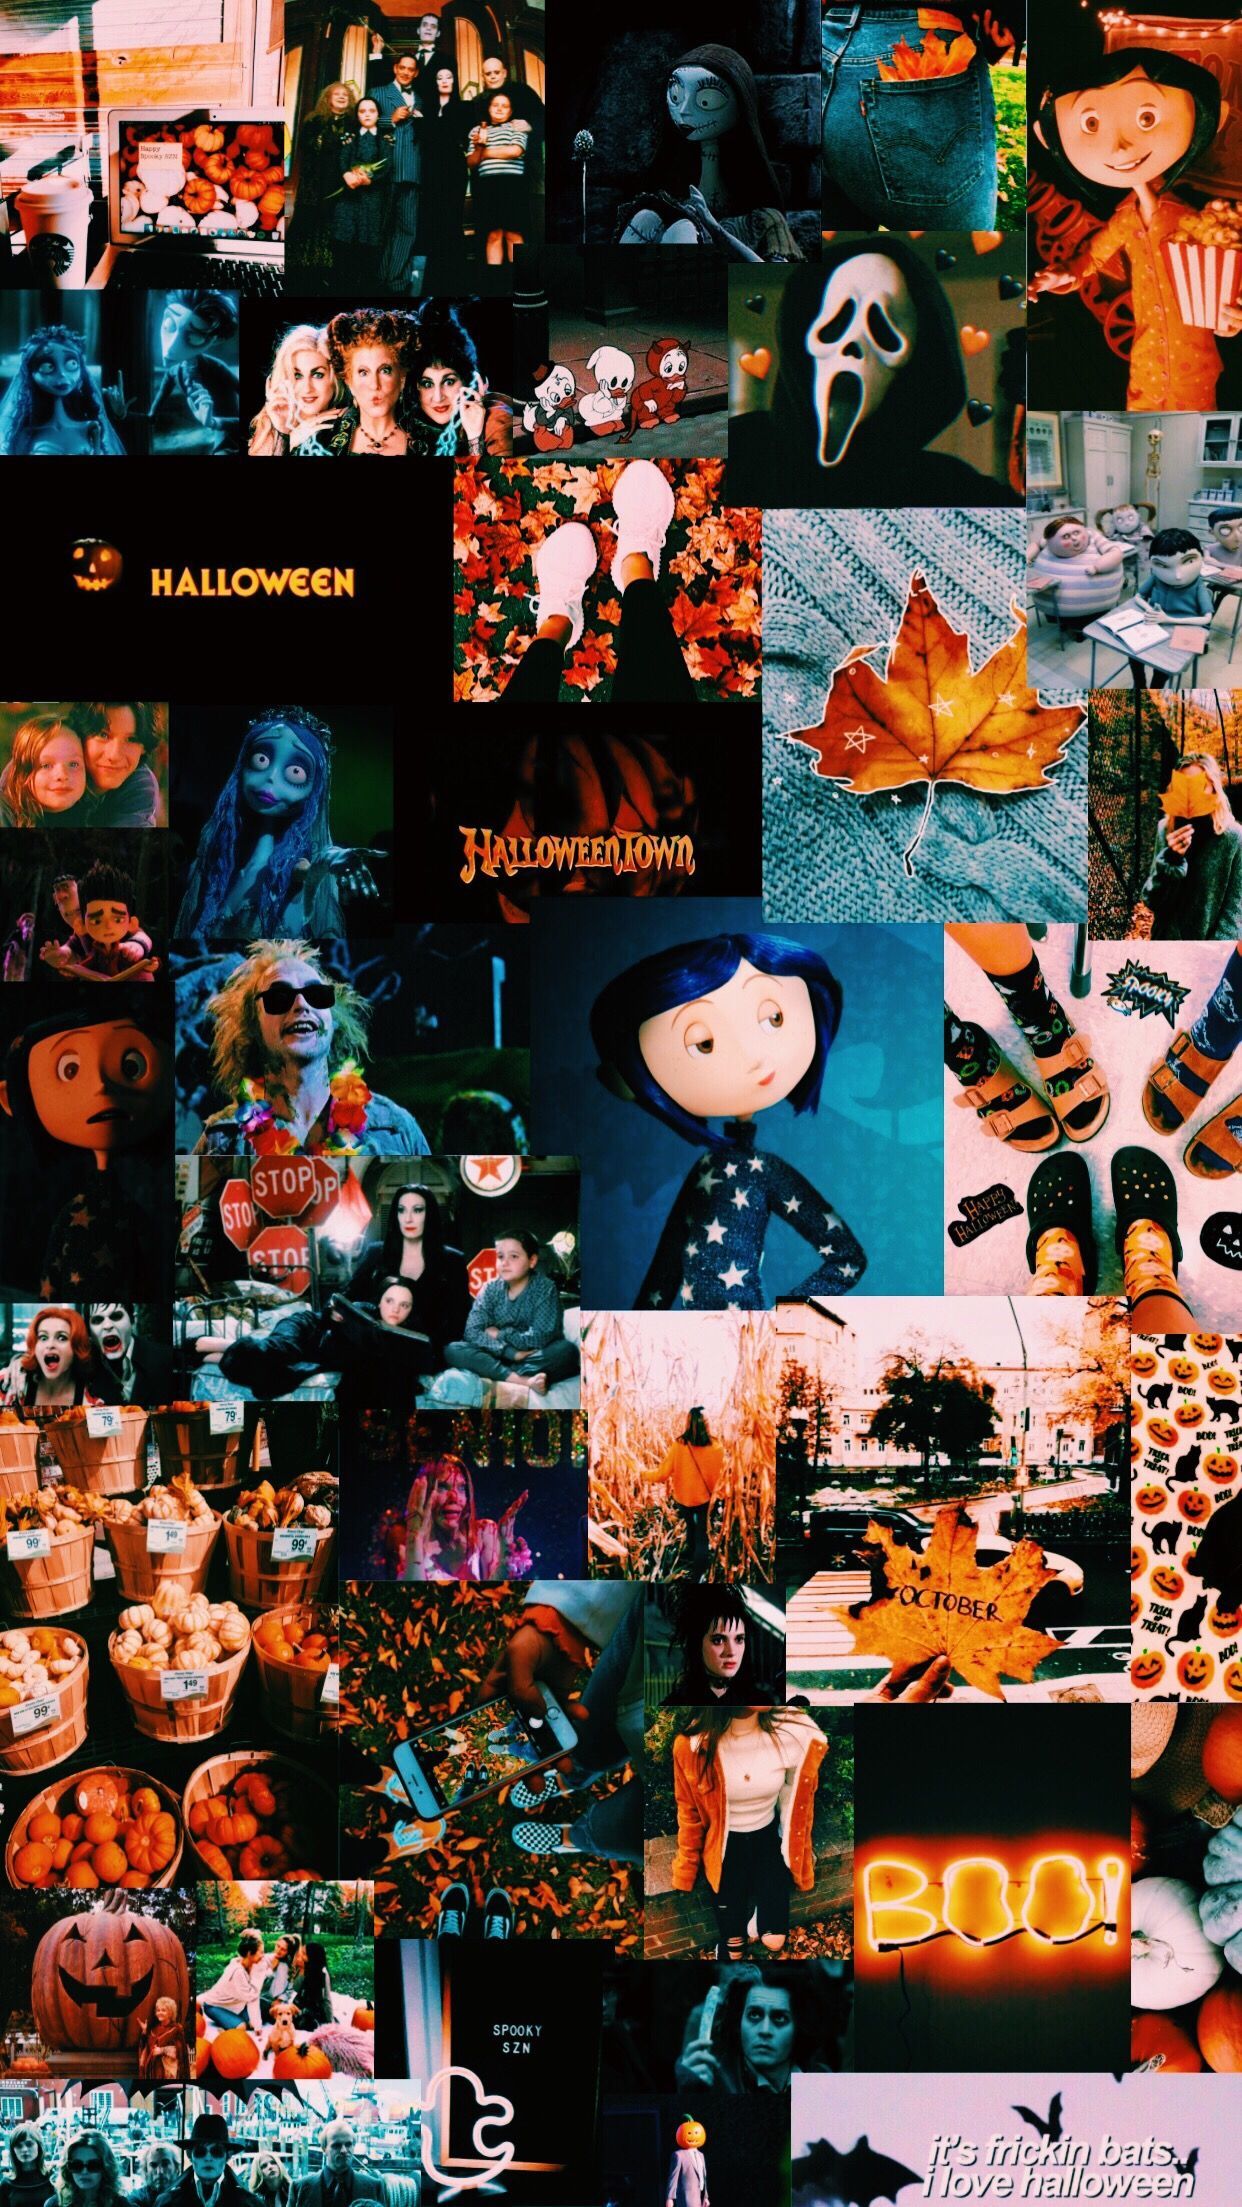 Aesthetic halloween background with images of horror movies, pumpkins, and more. - Halloween, cute Halloween